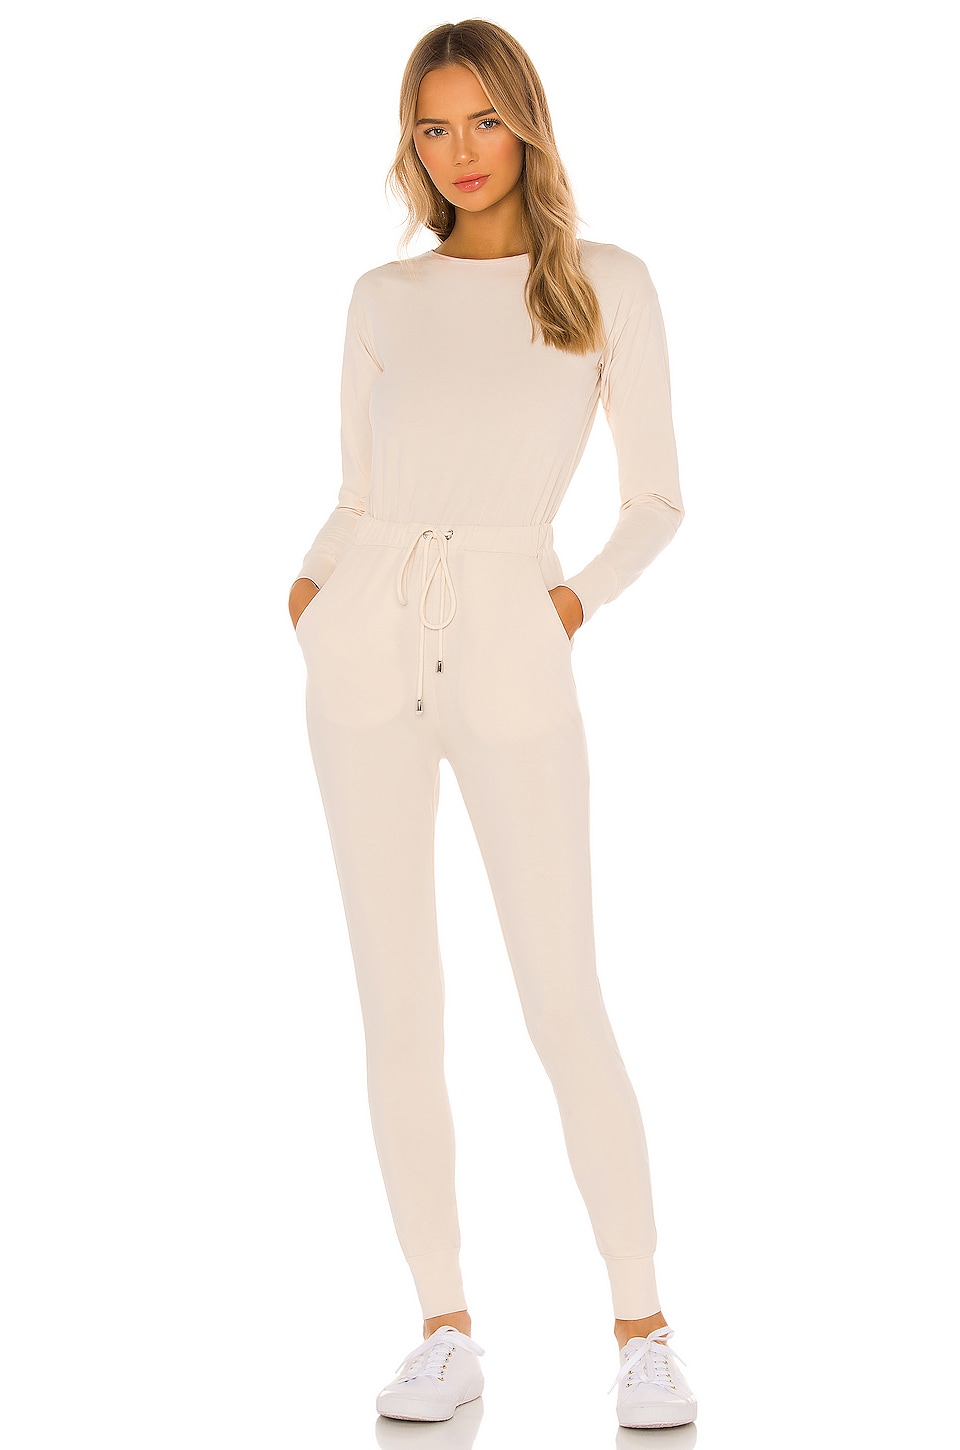 Lovers and Friends Vela Lounge Jumpsuit in Nude